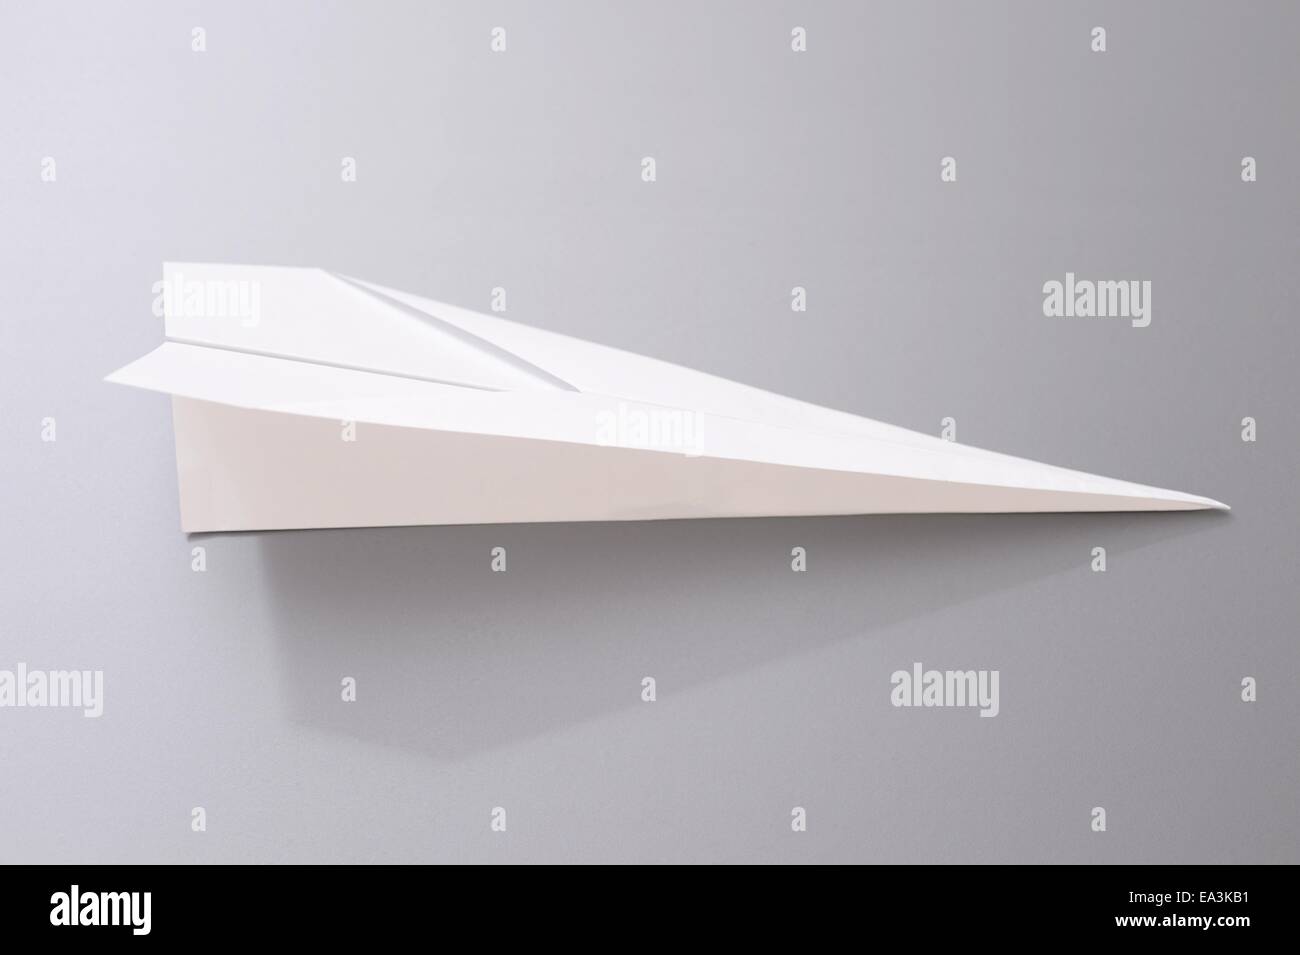 A close up shot of a paper plane Stock Photo